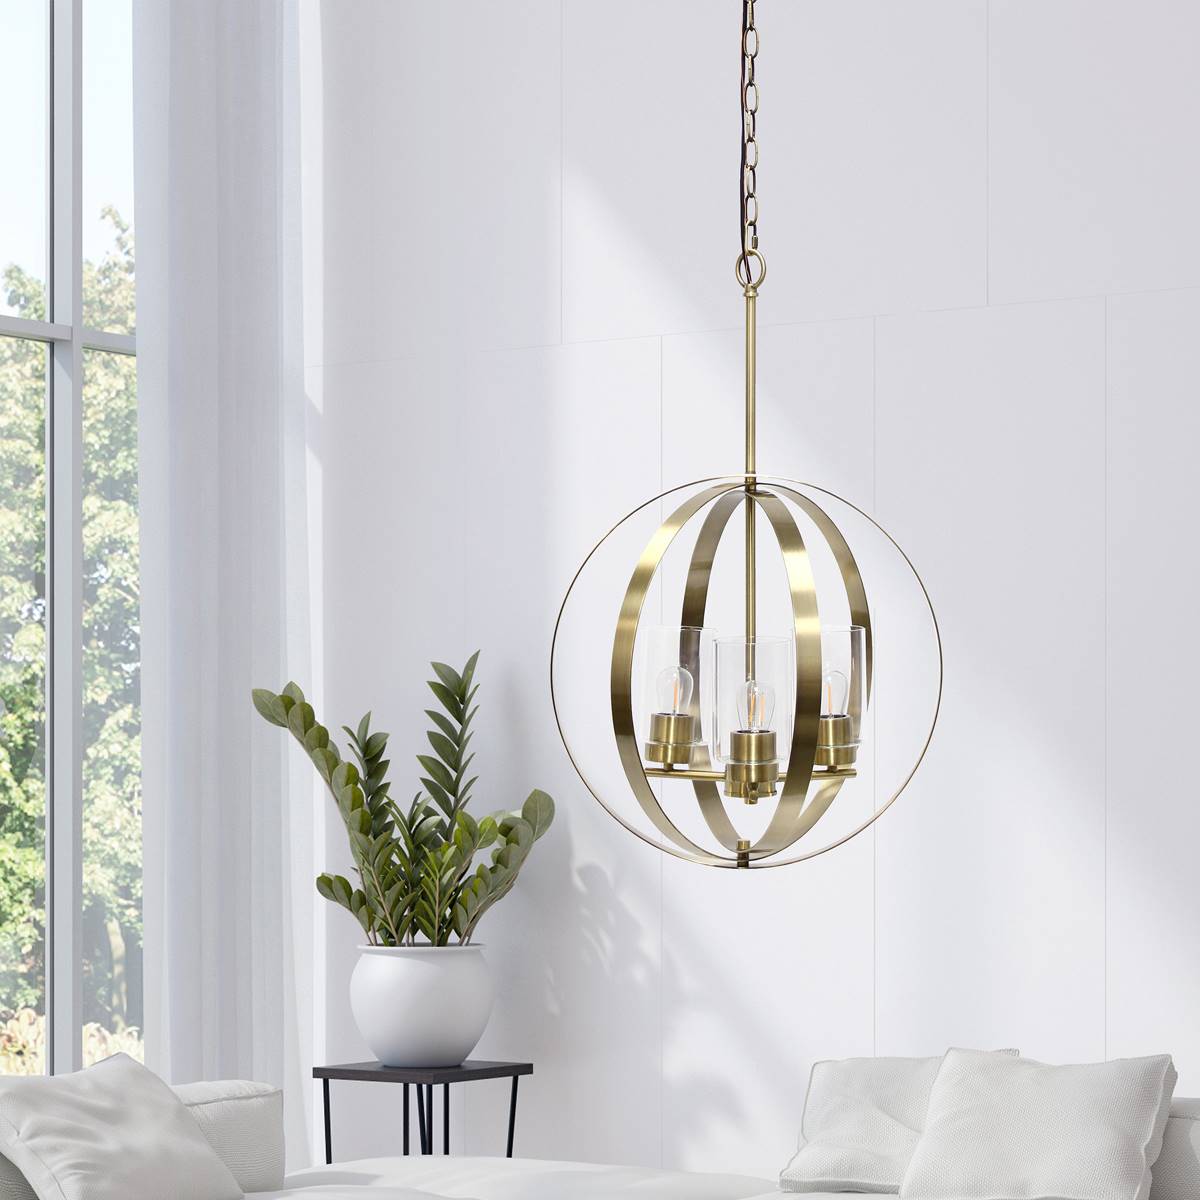 Lalia Home 3-Light 18in Globe Hanging Clear Glass Ceiling Pendant